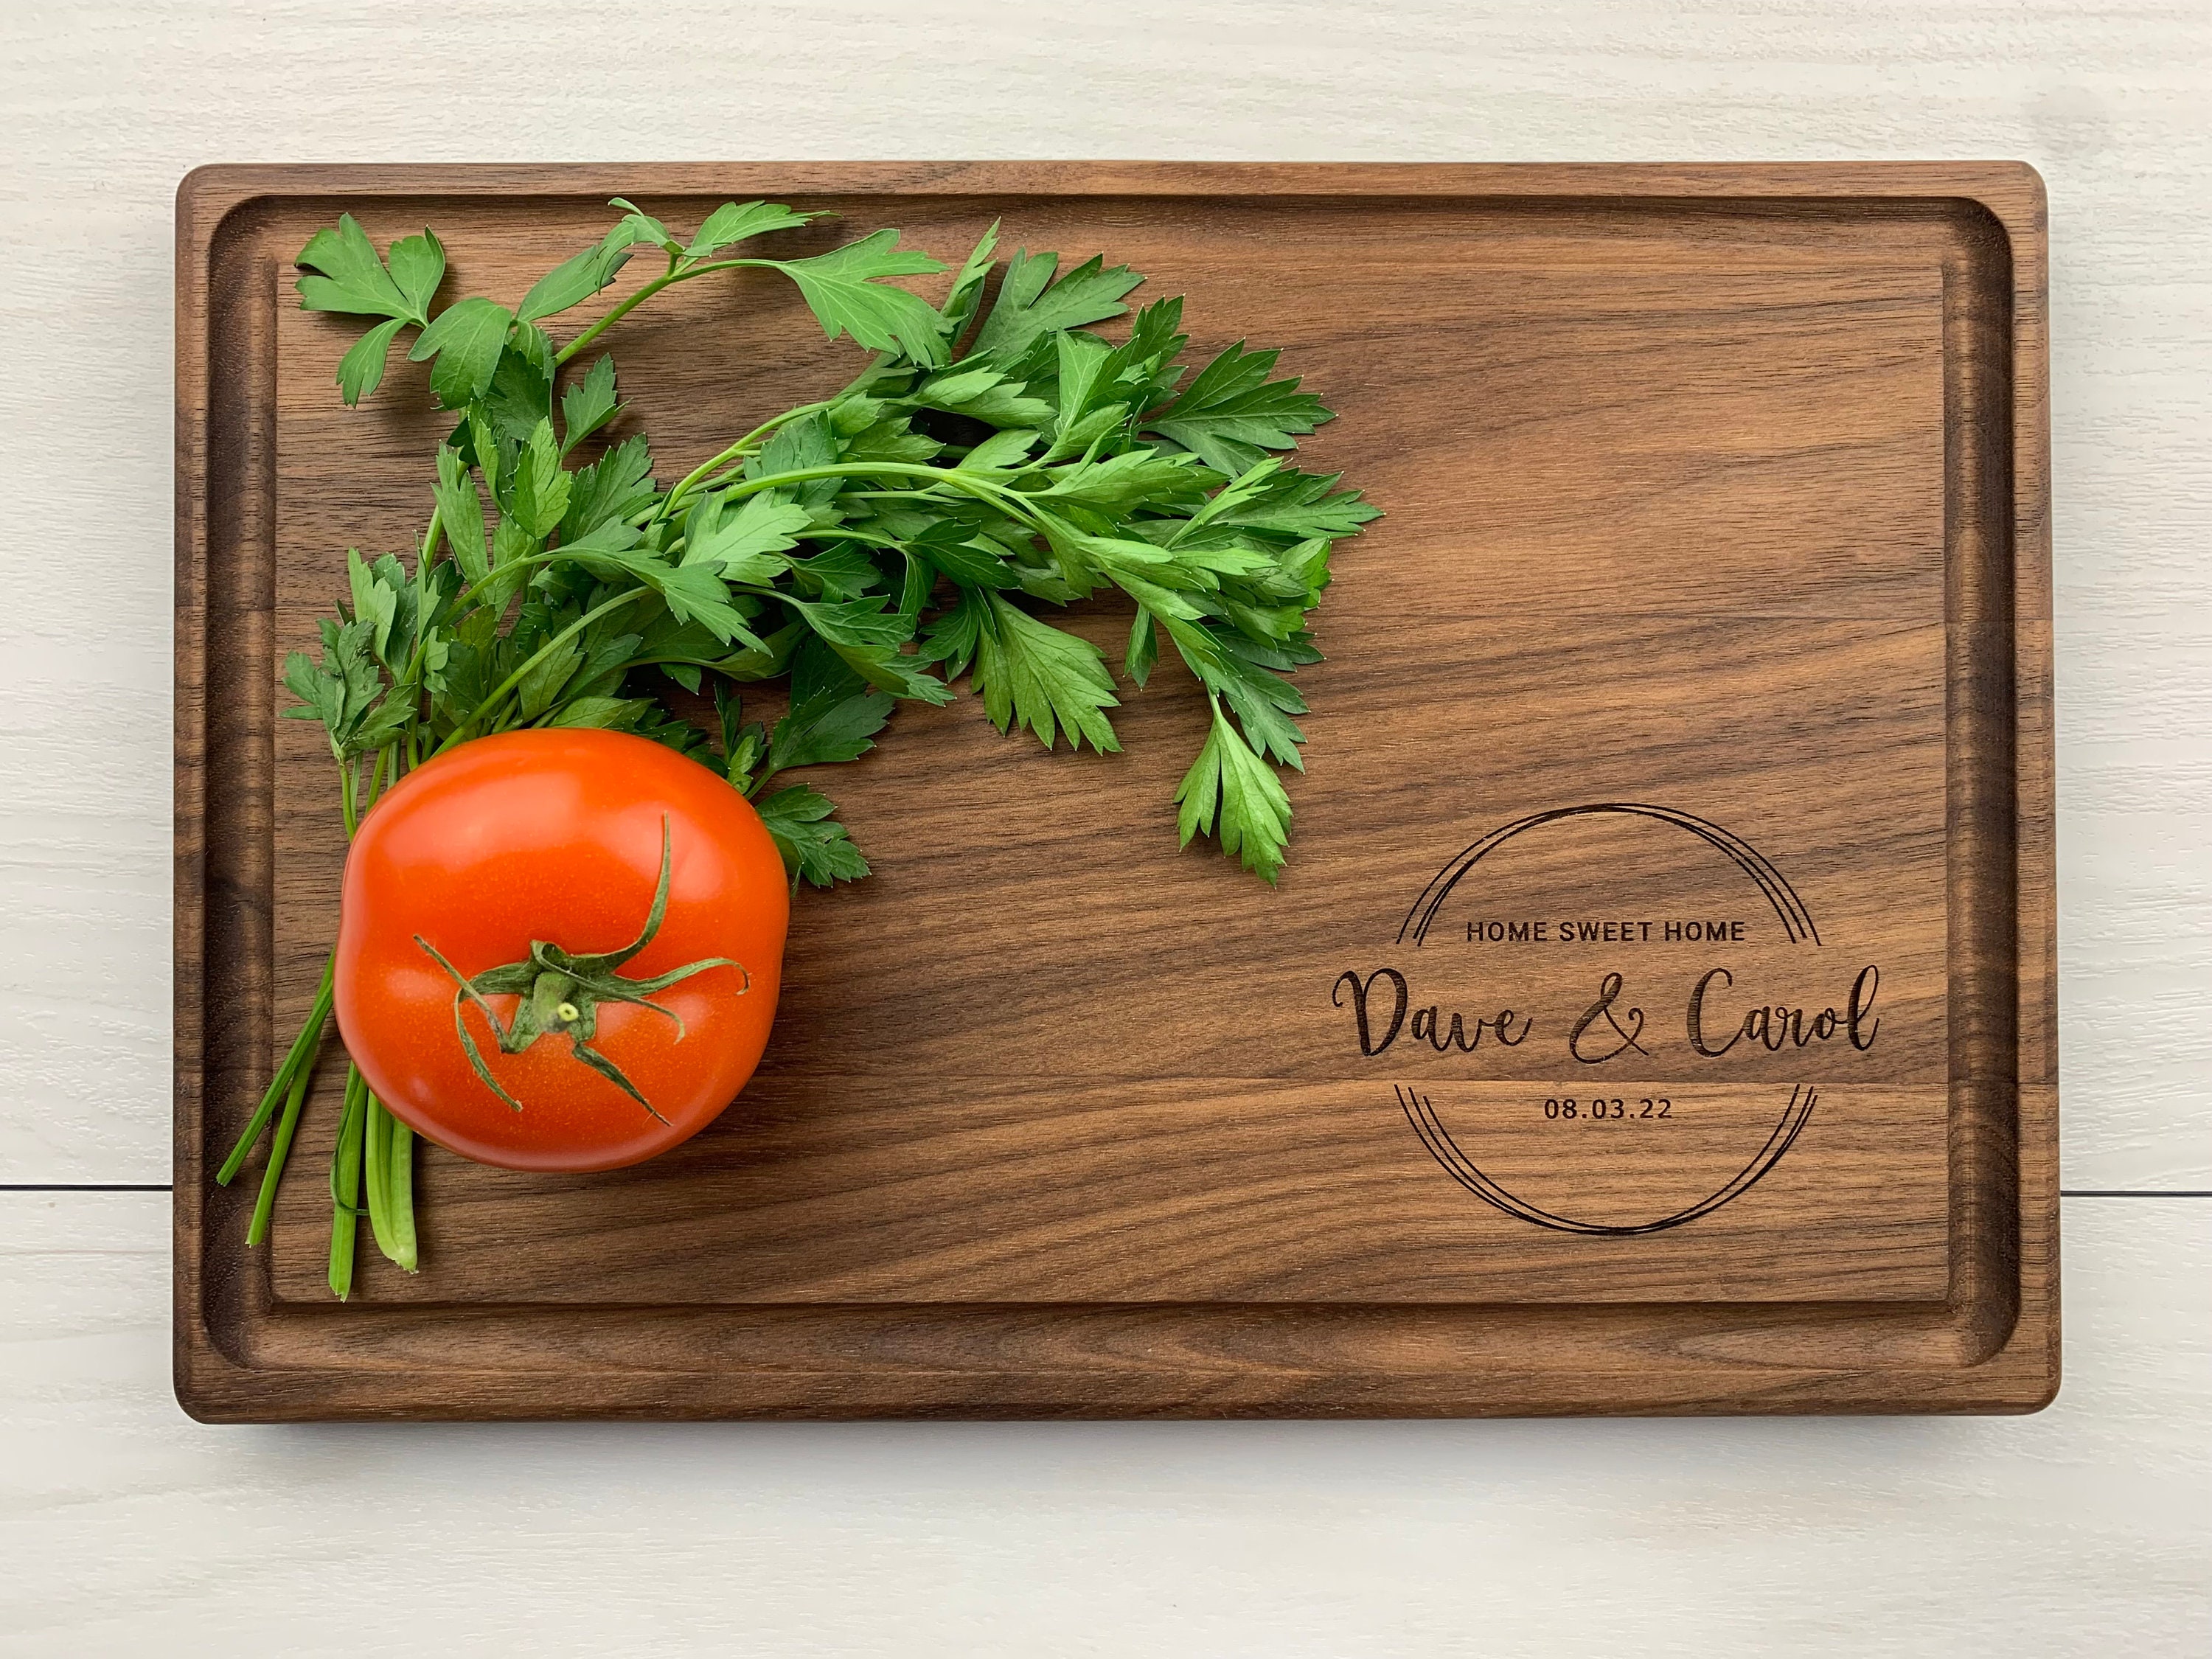 Personalized Cutting Board • Wedding Gift • Engagement • Gifts for